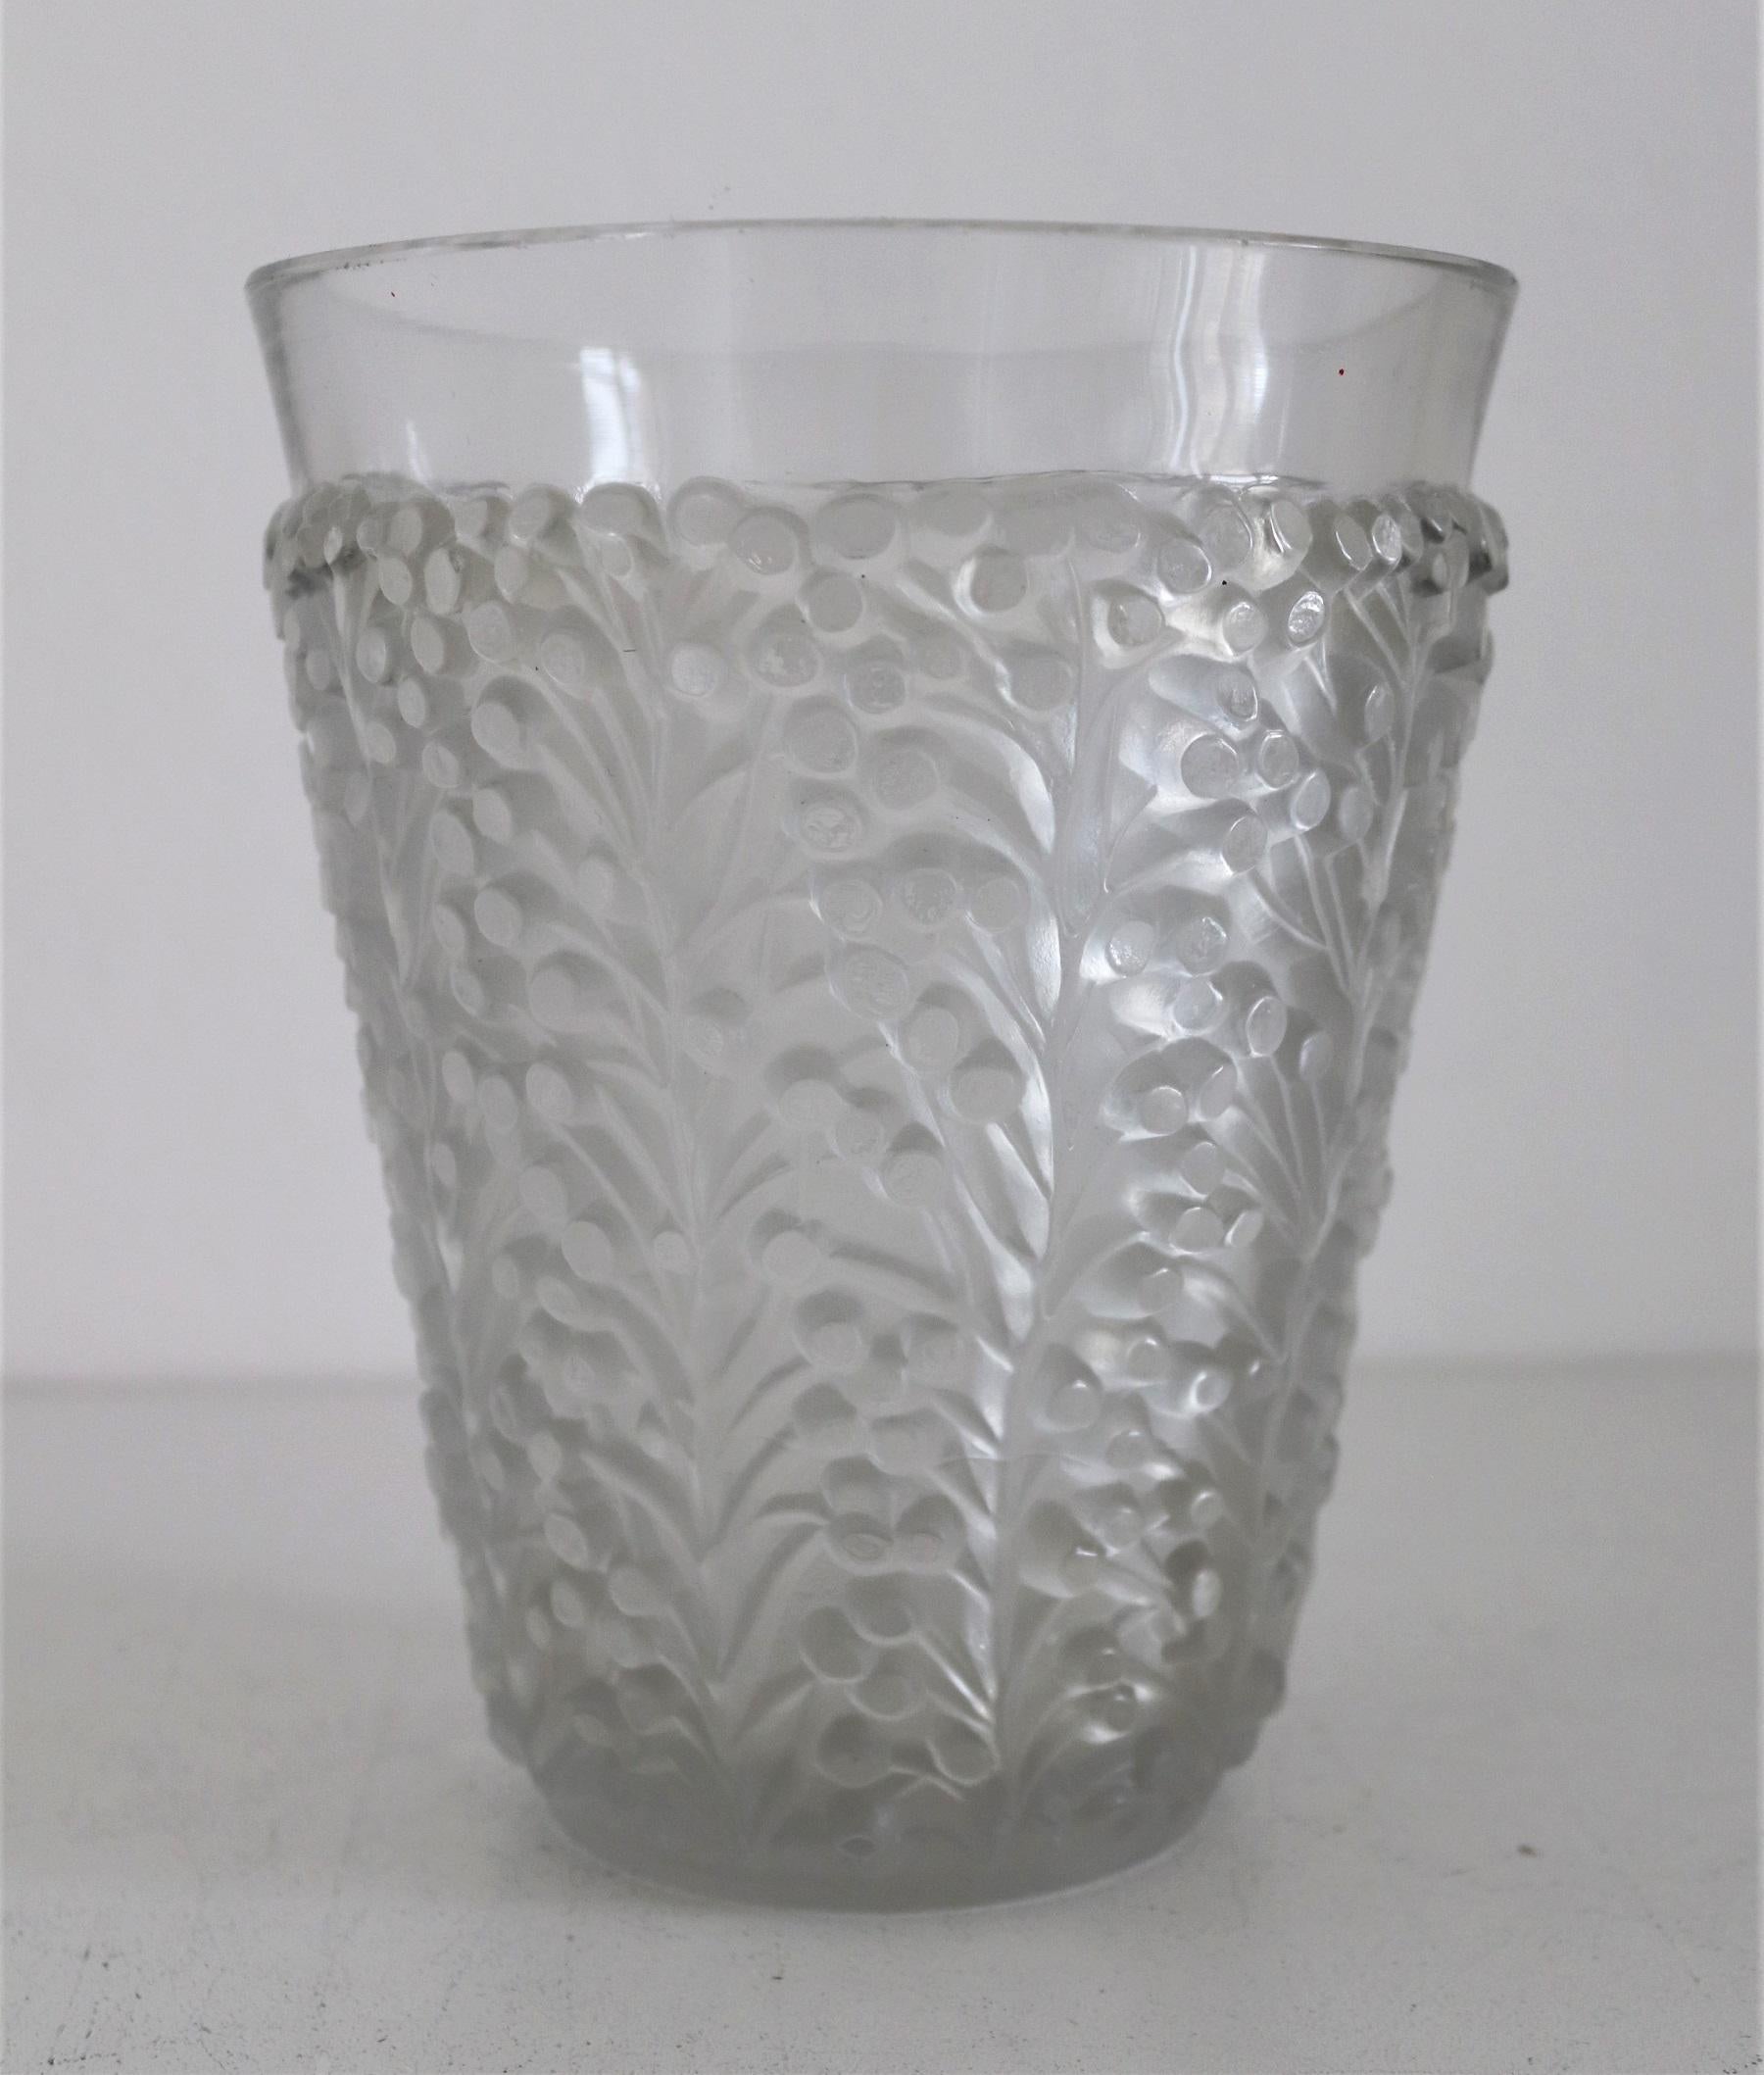 Gorgeous vase made of press-molded frosted and clear glass by René Lalique, France, design circa from 1937.
The decoration of the glass consists of leaf tendrils and small berries, and goes up to approx. 1in (2.5cm) below the edge of the